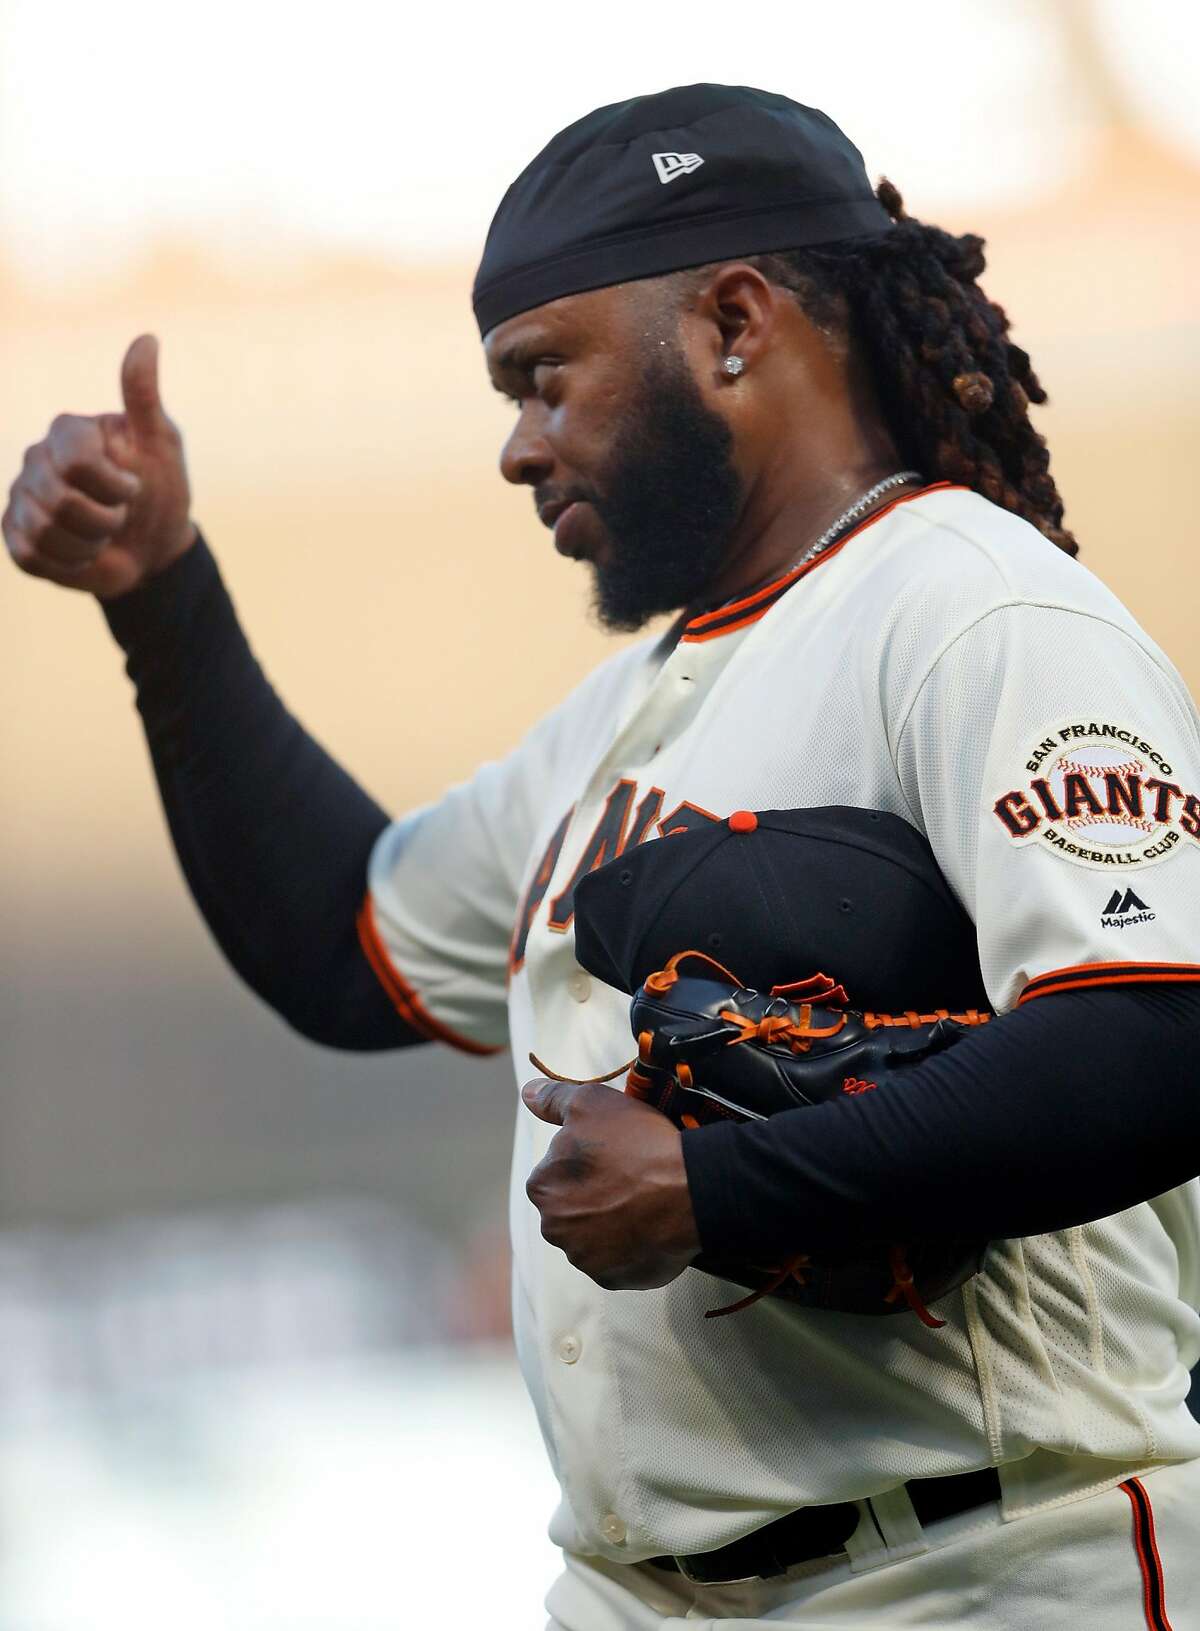 San Francisco Giants' Johnny Cueto reacts to retiring the side in 1st inning against Pittsburgh Pirates during MLB game at Oracle Park in San Francisco, Calif., on Tuesday, September 10, 2019.